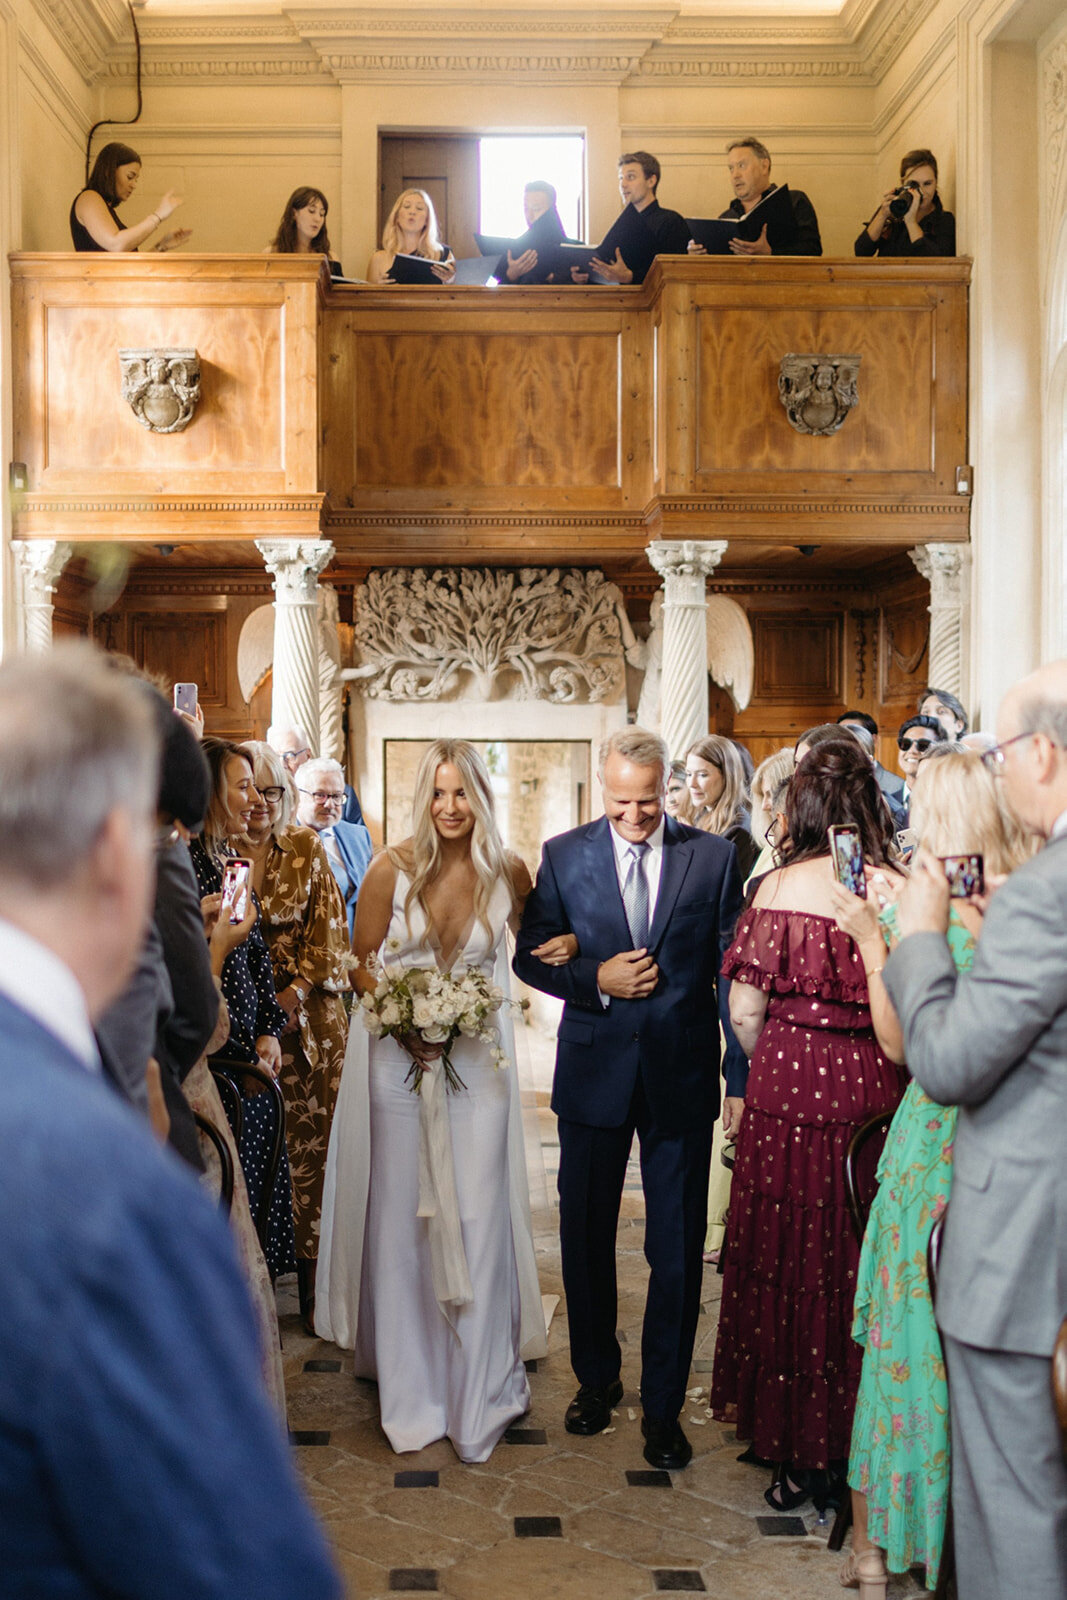 Attabara Studio UK Luxury Wedding Planners Private Estate Marquee Wedding with Rebecca Rees2 Attabara Studio UK Luxury Wedding Planners Private Estate Marquee Wedding with Rebecca Rees34